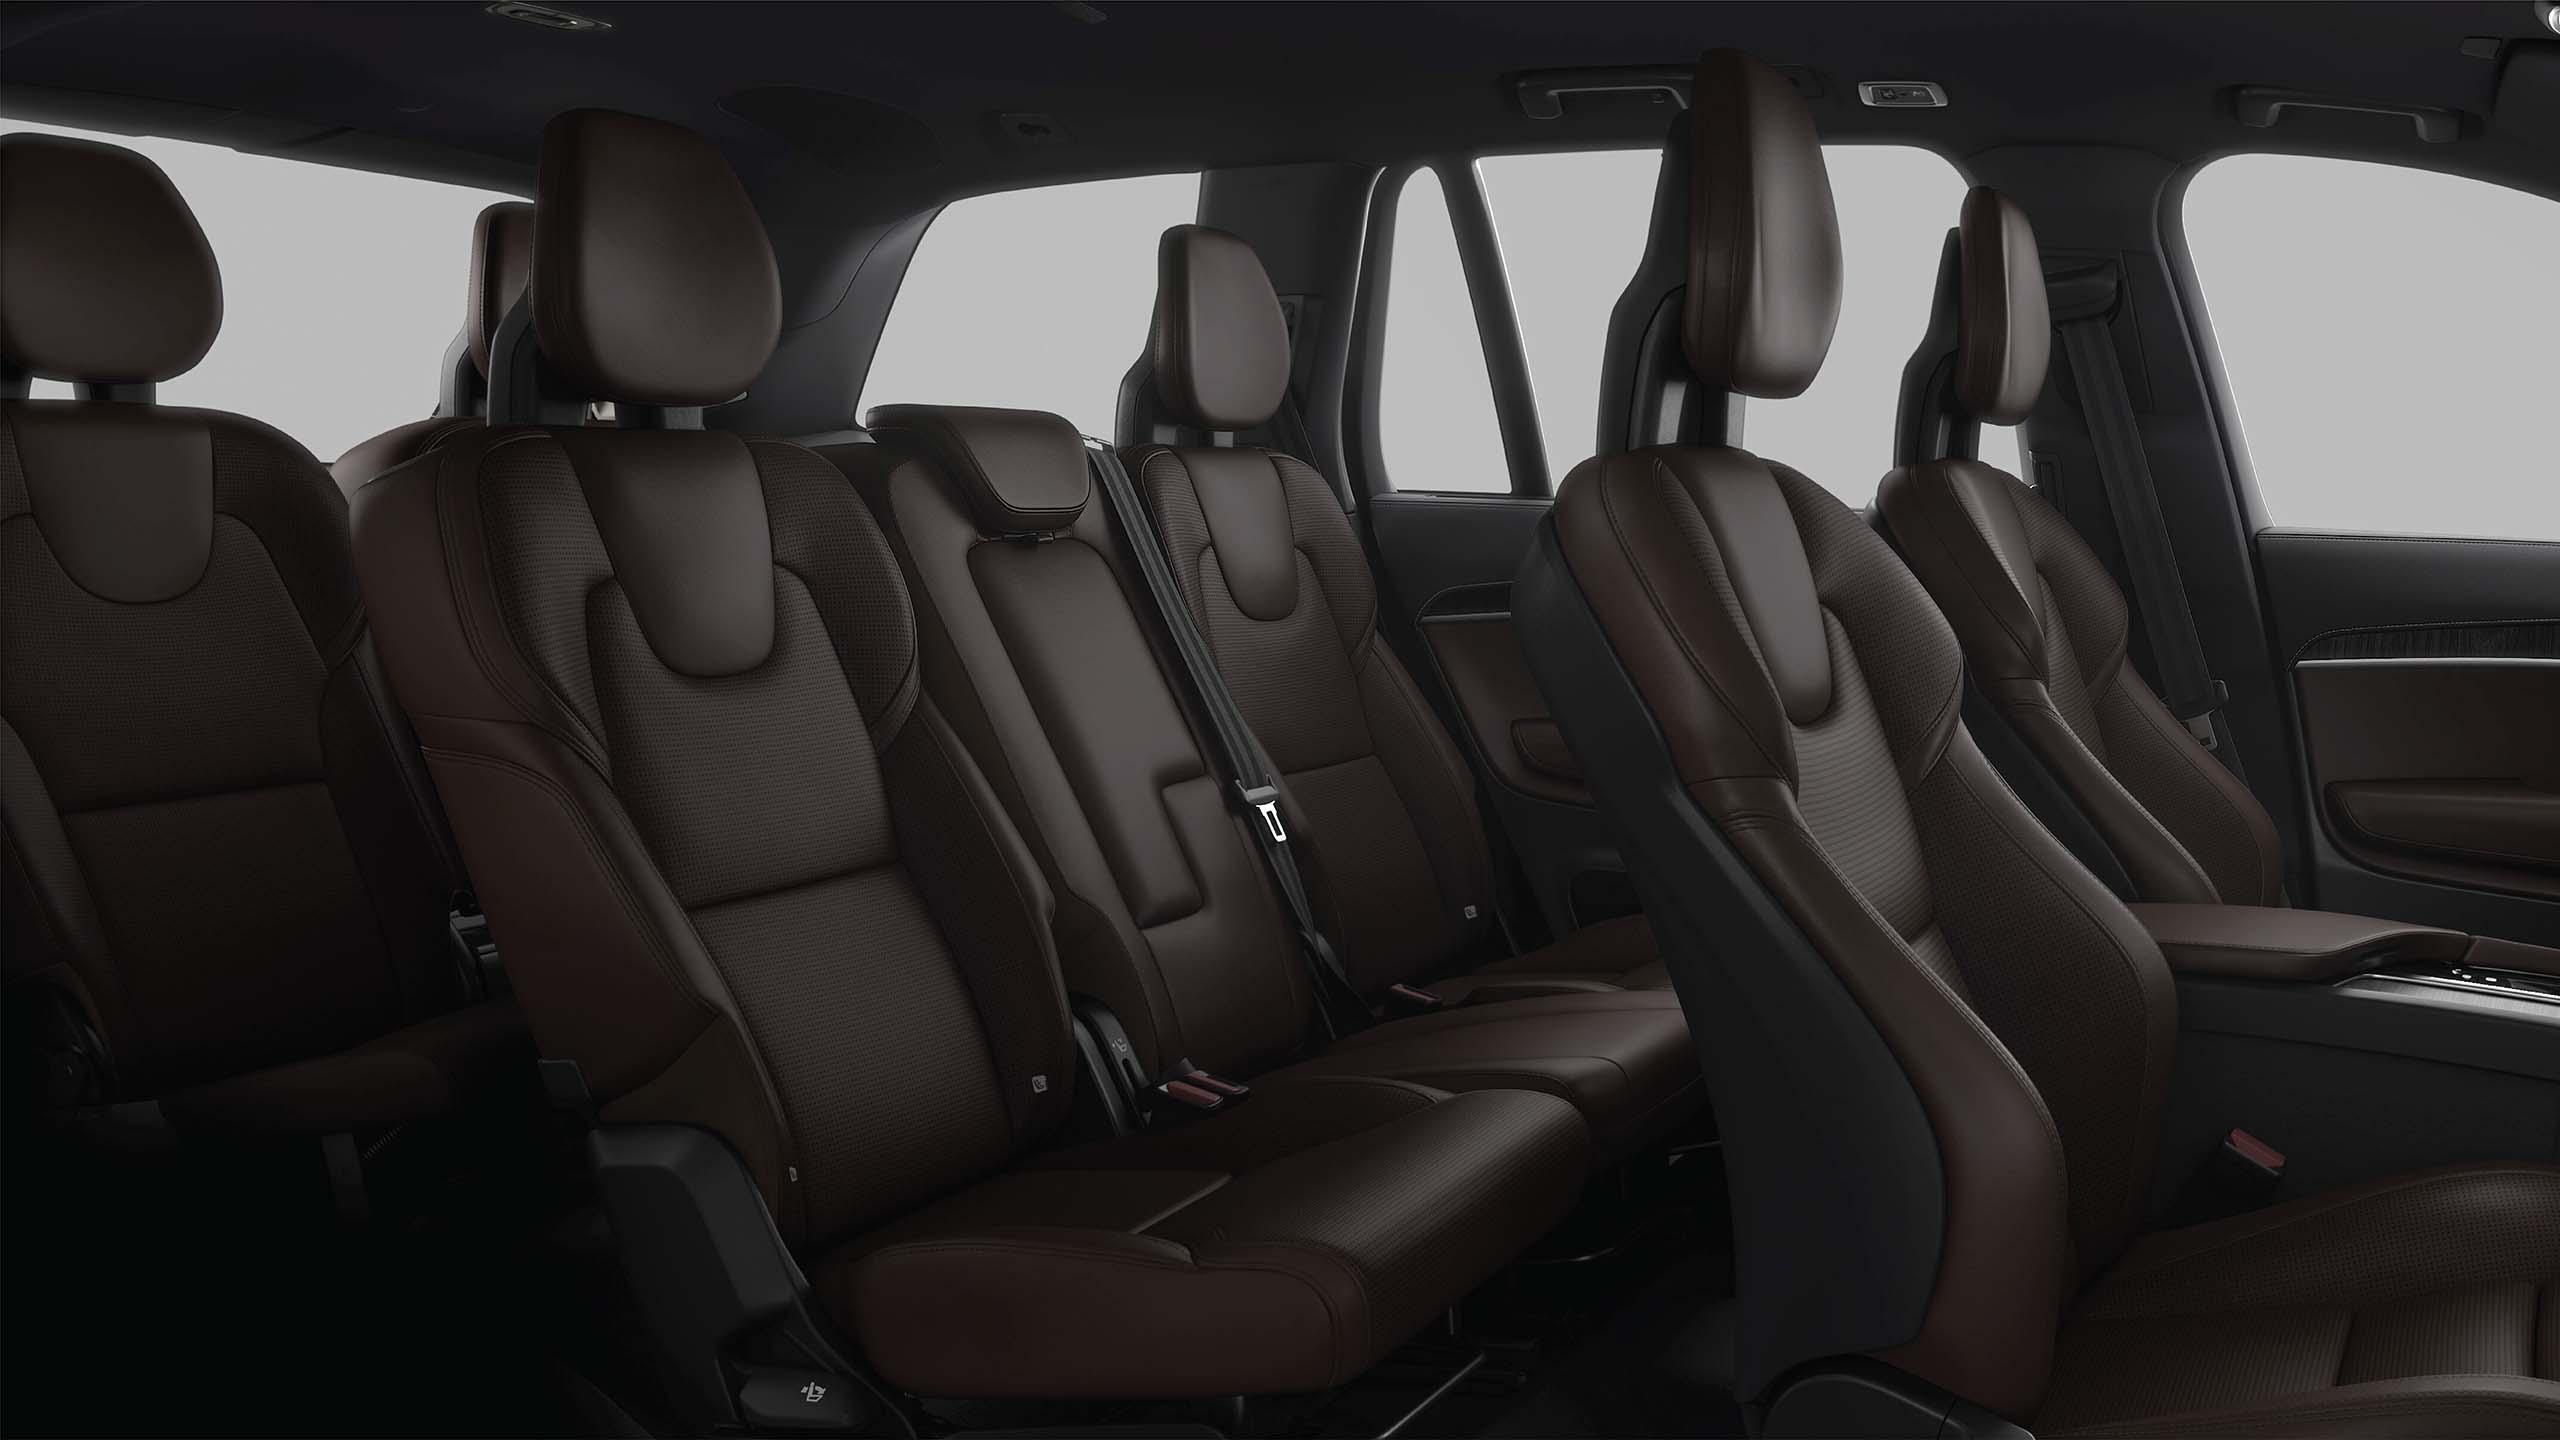 Inside a Volvo XC90 with 3 rows, blonde interior on seats.